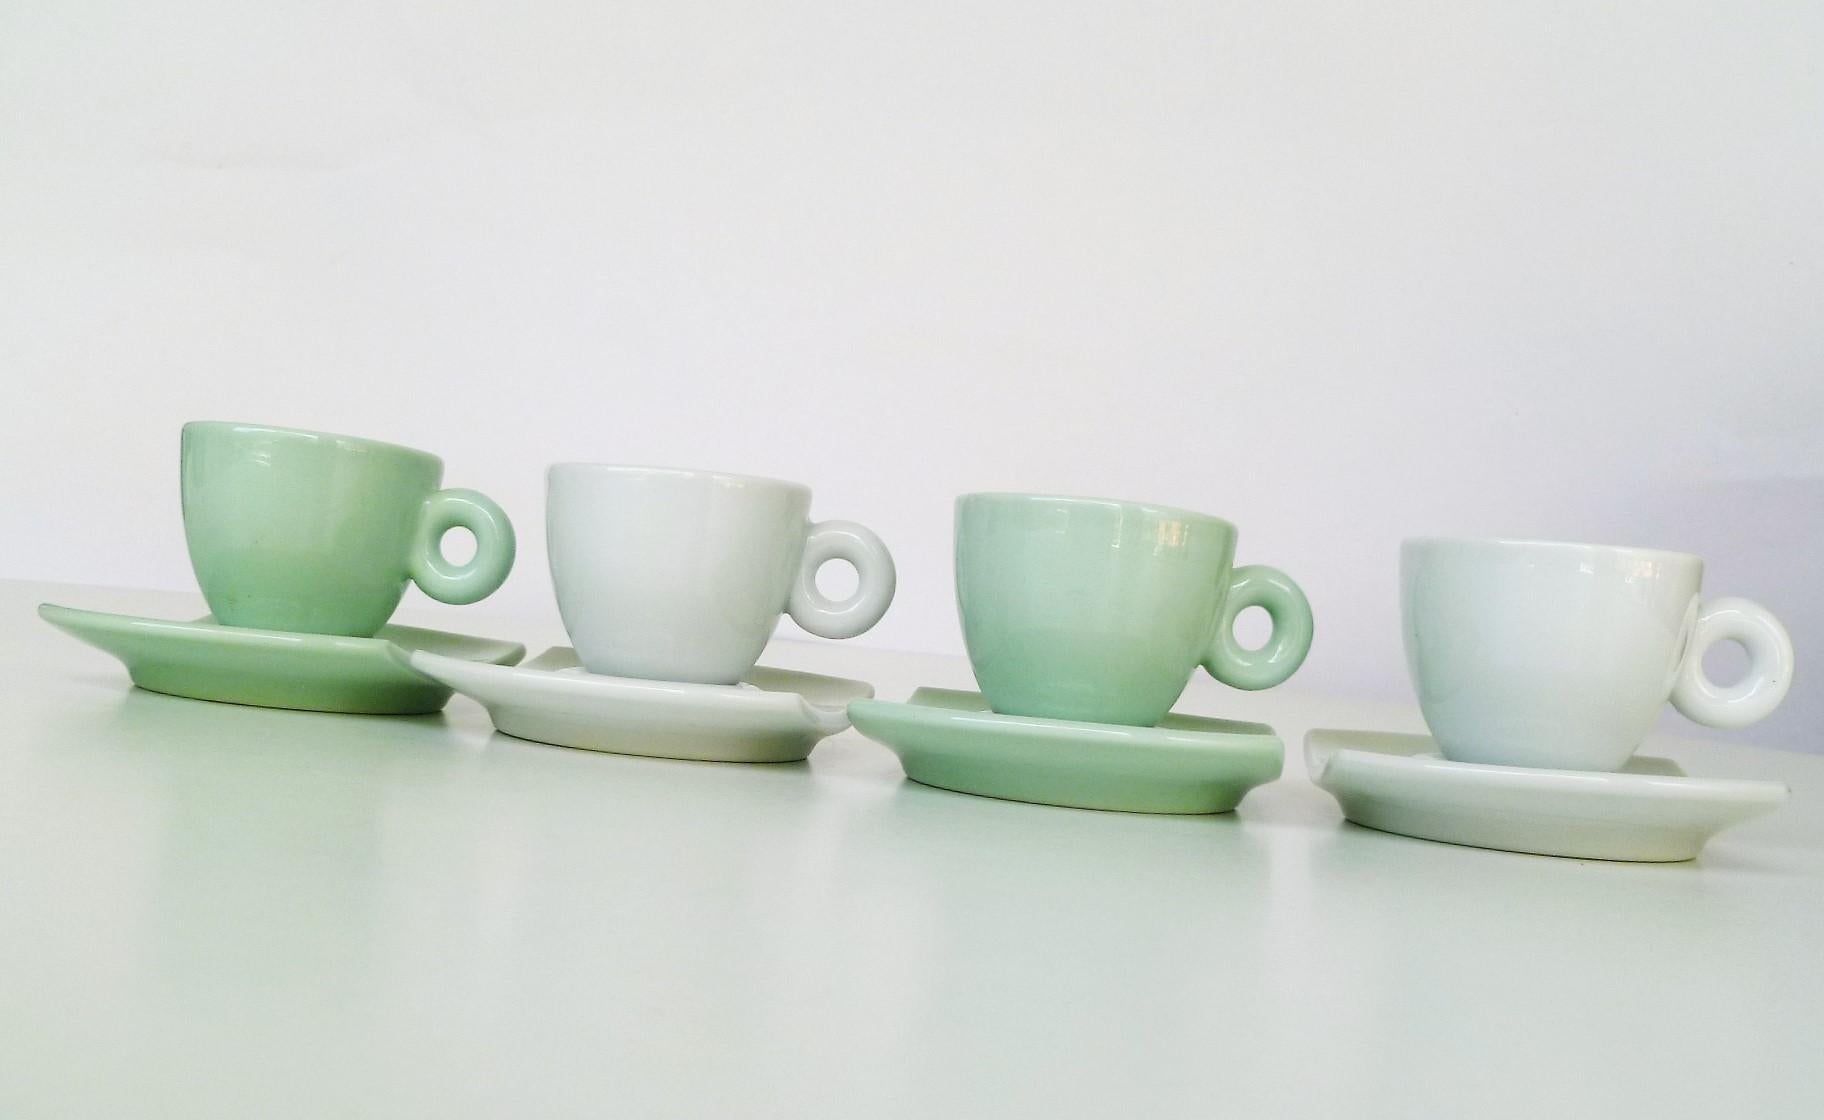 Designed in 2004 by French artist Daniel Buren for Illy Collection, a set of 2 white and 2 celadon Green Espresso or Demi-Tasse cups and saucers. This set is the Bianco Verde grouping, and was also made in the Bianco Blu color scheme, both sets are